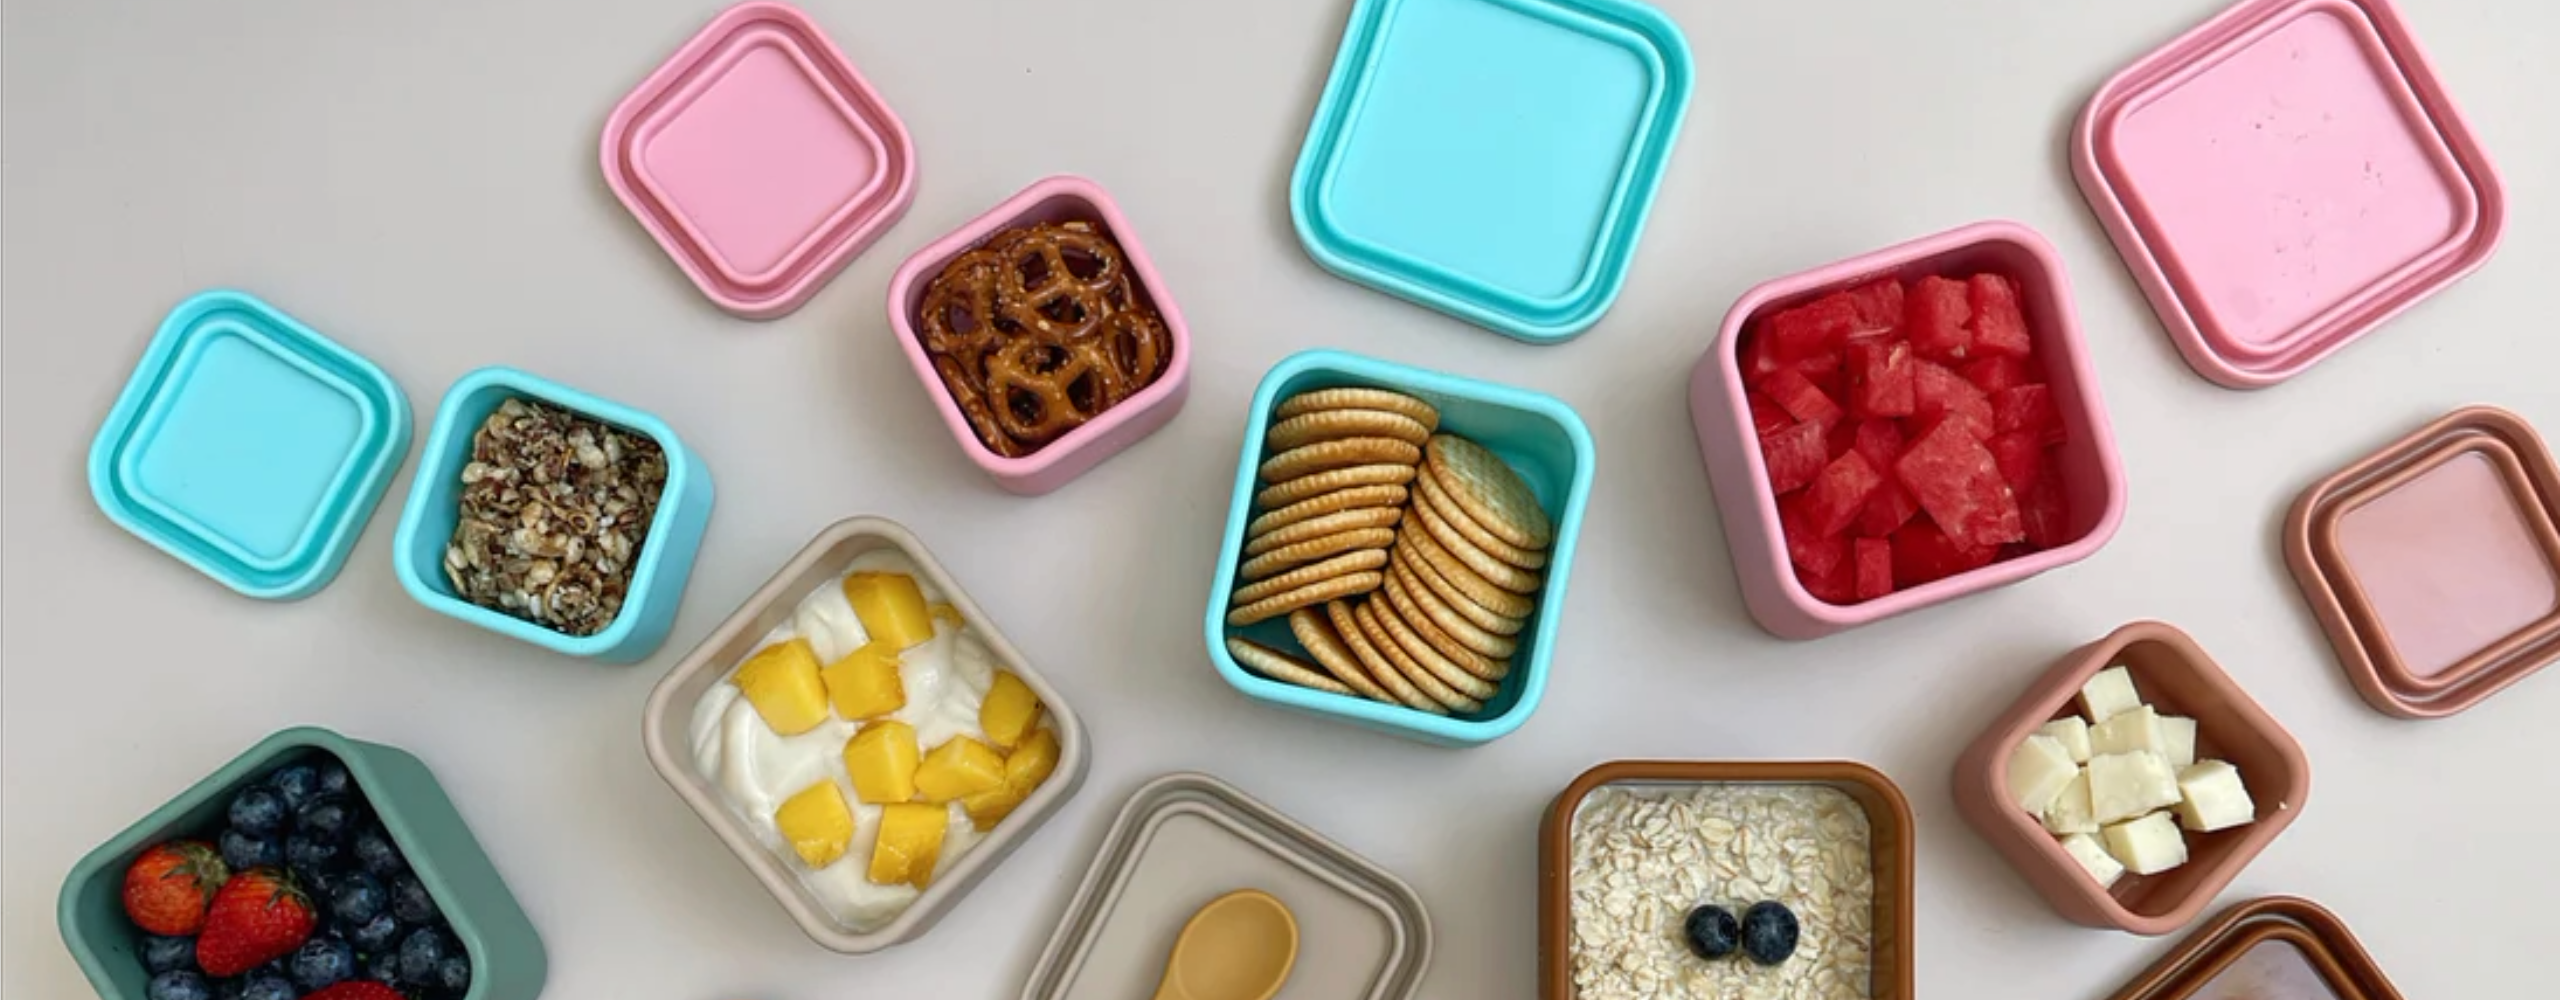 Silicon Mini Containers from The Zero Waste People